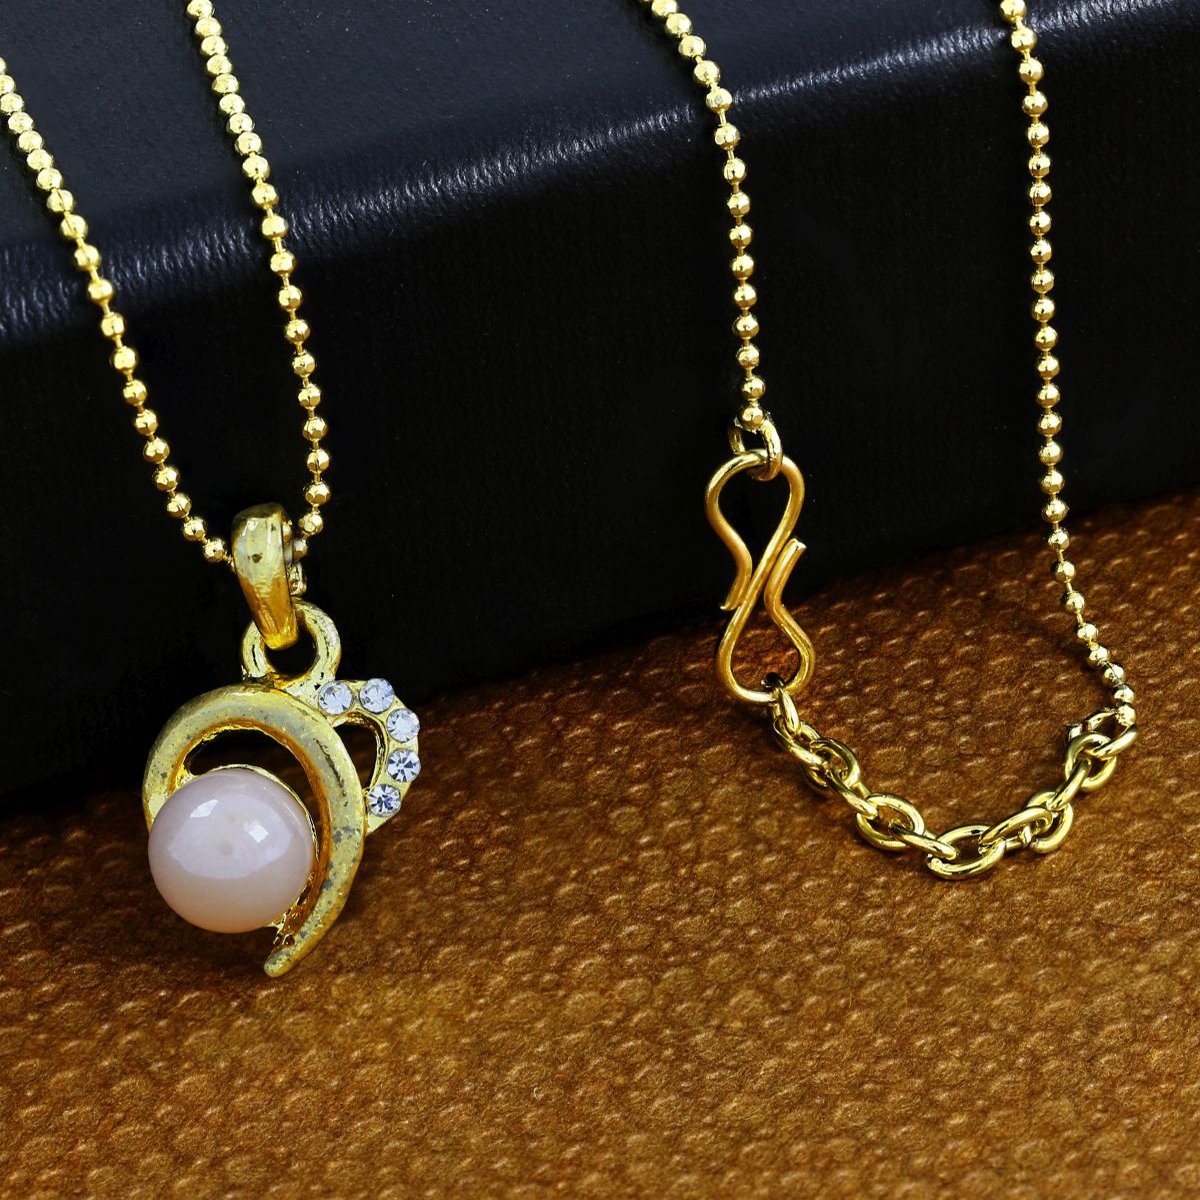 New Pearl Pendant Necklace for Women Sweater Chain Gold Color Long Chain  Necklace Jewelry | Wish